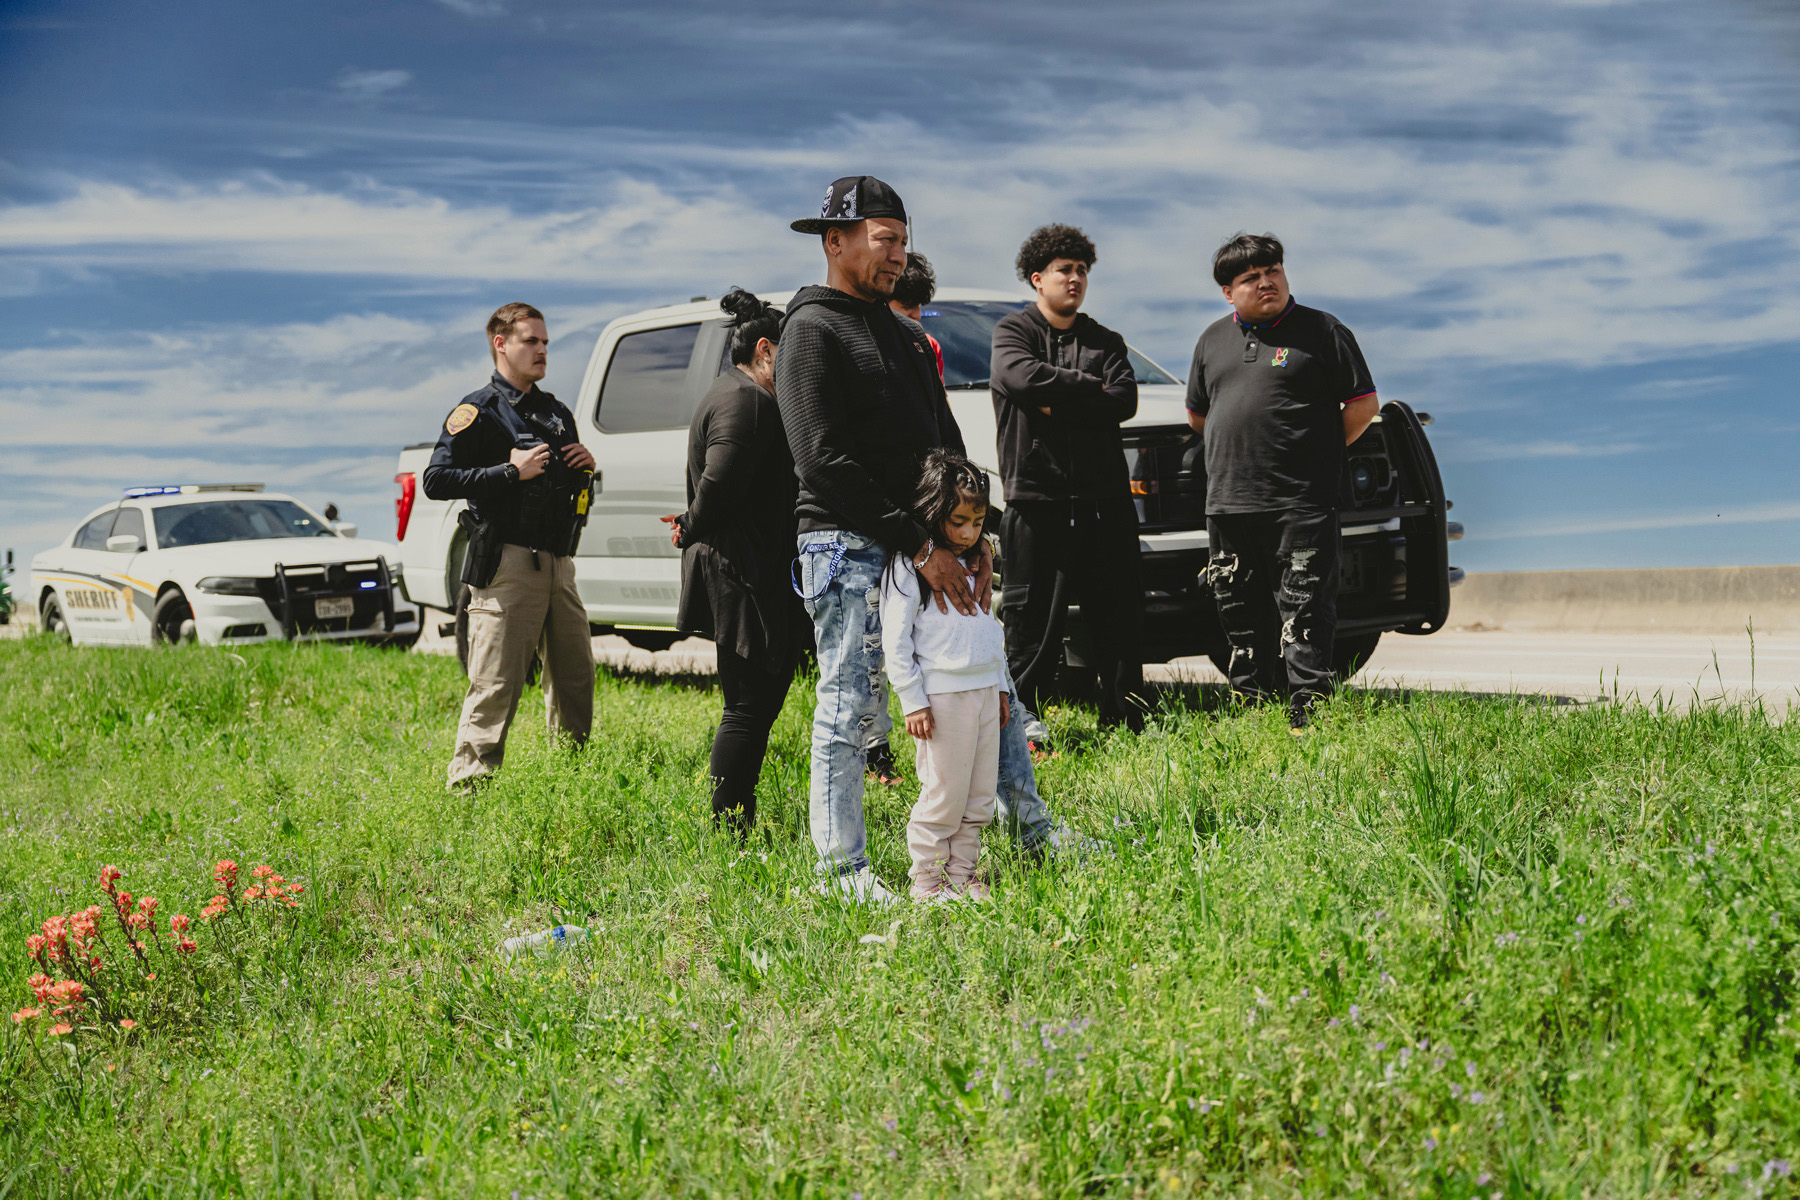 Immigrants from Mexico and Central America watch as Chambers County Highway Interdiction Detective Cody Burk searches their vehicle on March 19. Senate Bill 4 would allow police like Detective Burk to arrest people suspected of being in the U.S. without proper immigration status.